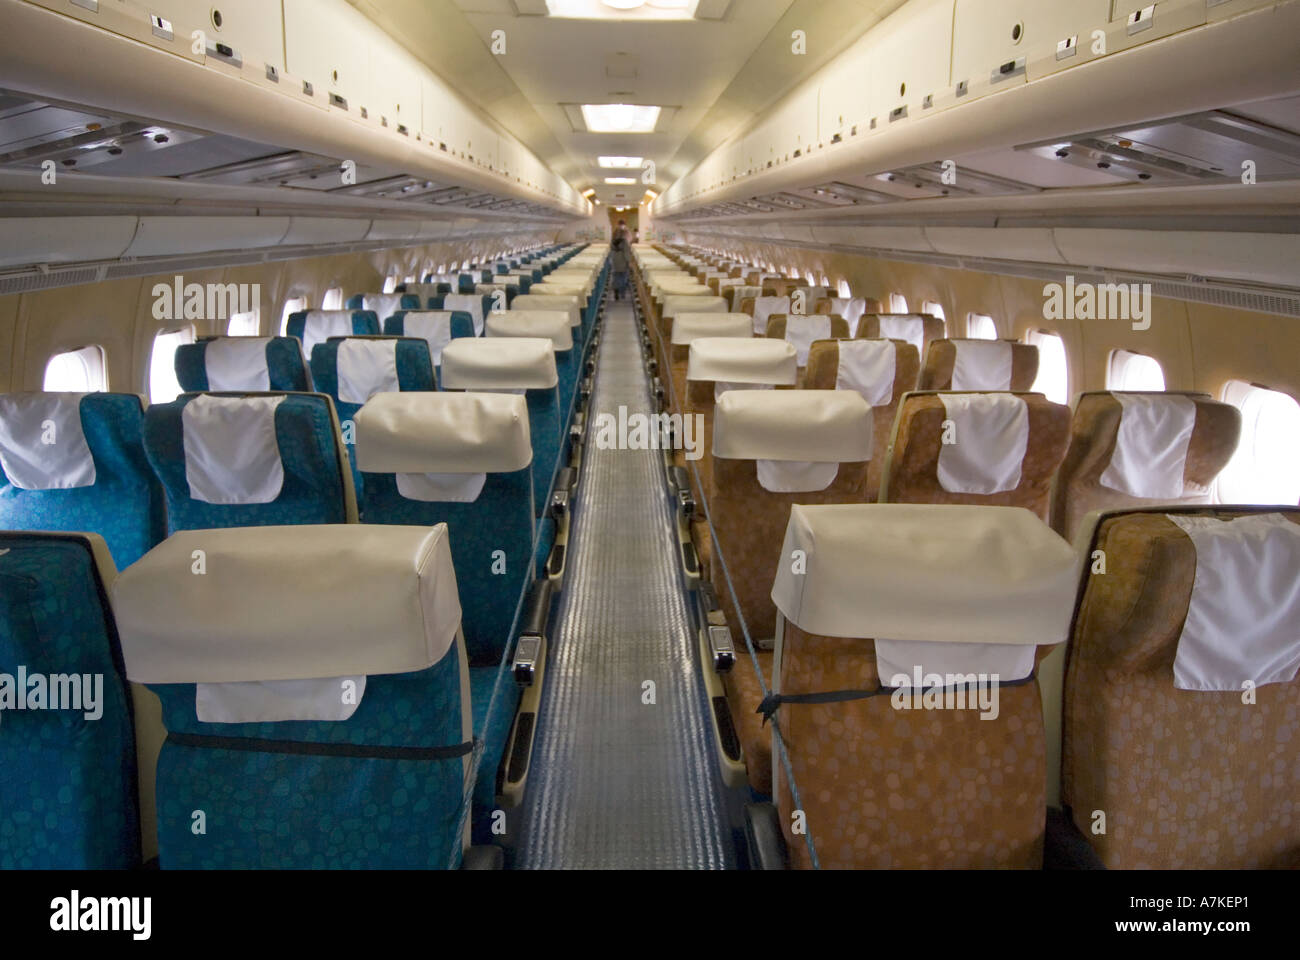 Duxford Imperial War Museum BOAC Cunard Super VC10 passenger jet airliner cabin interior being viewed by visitors Stock Photo